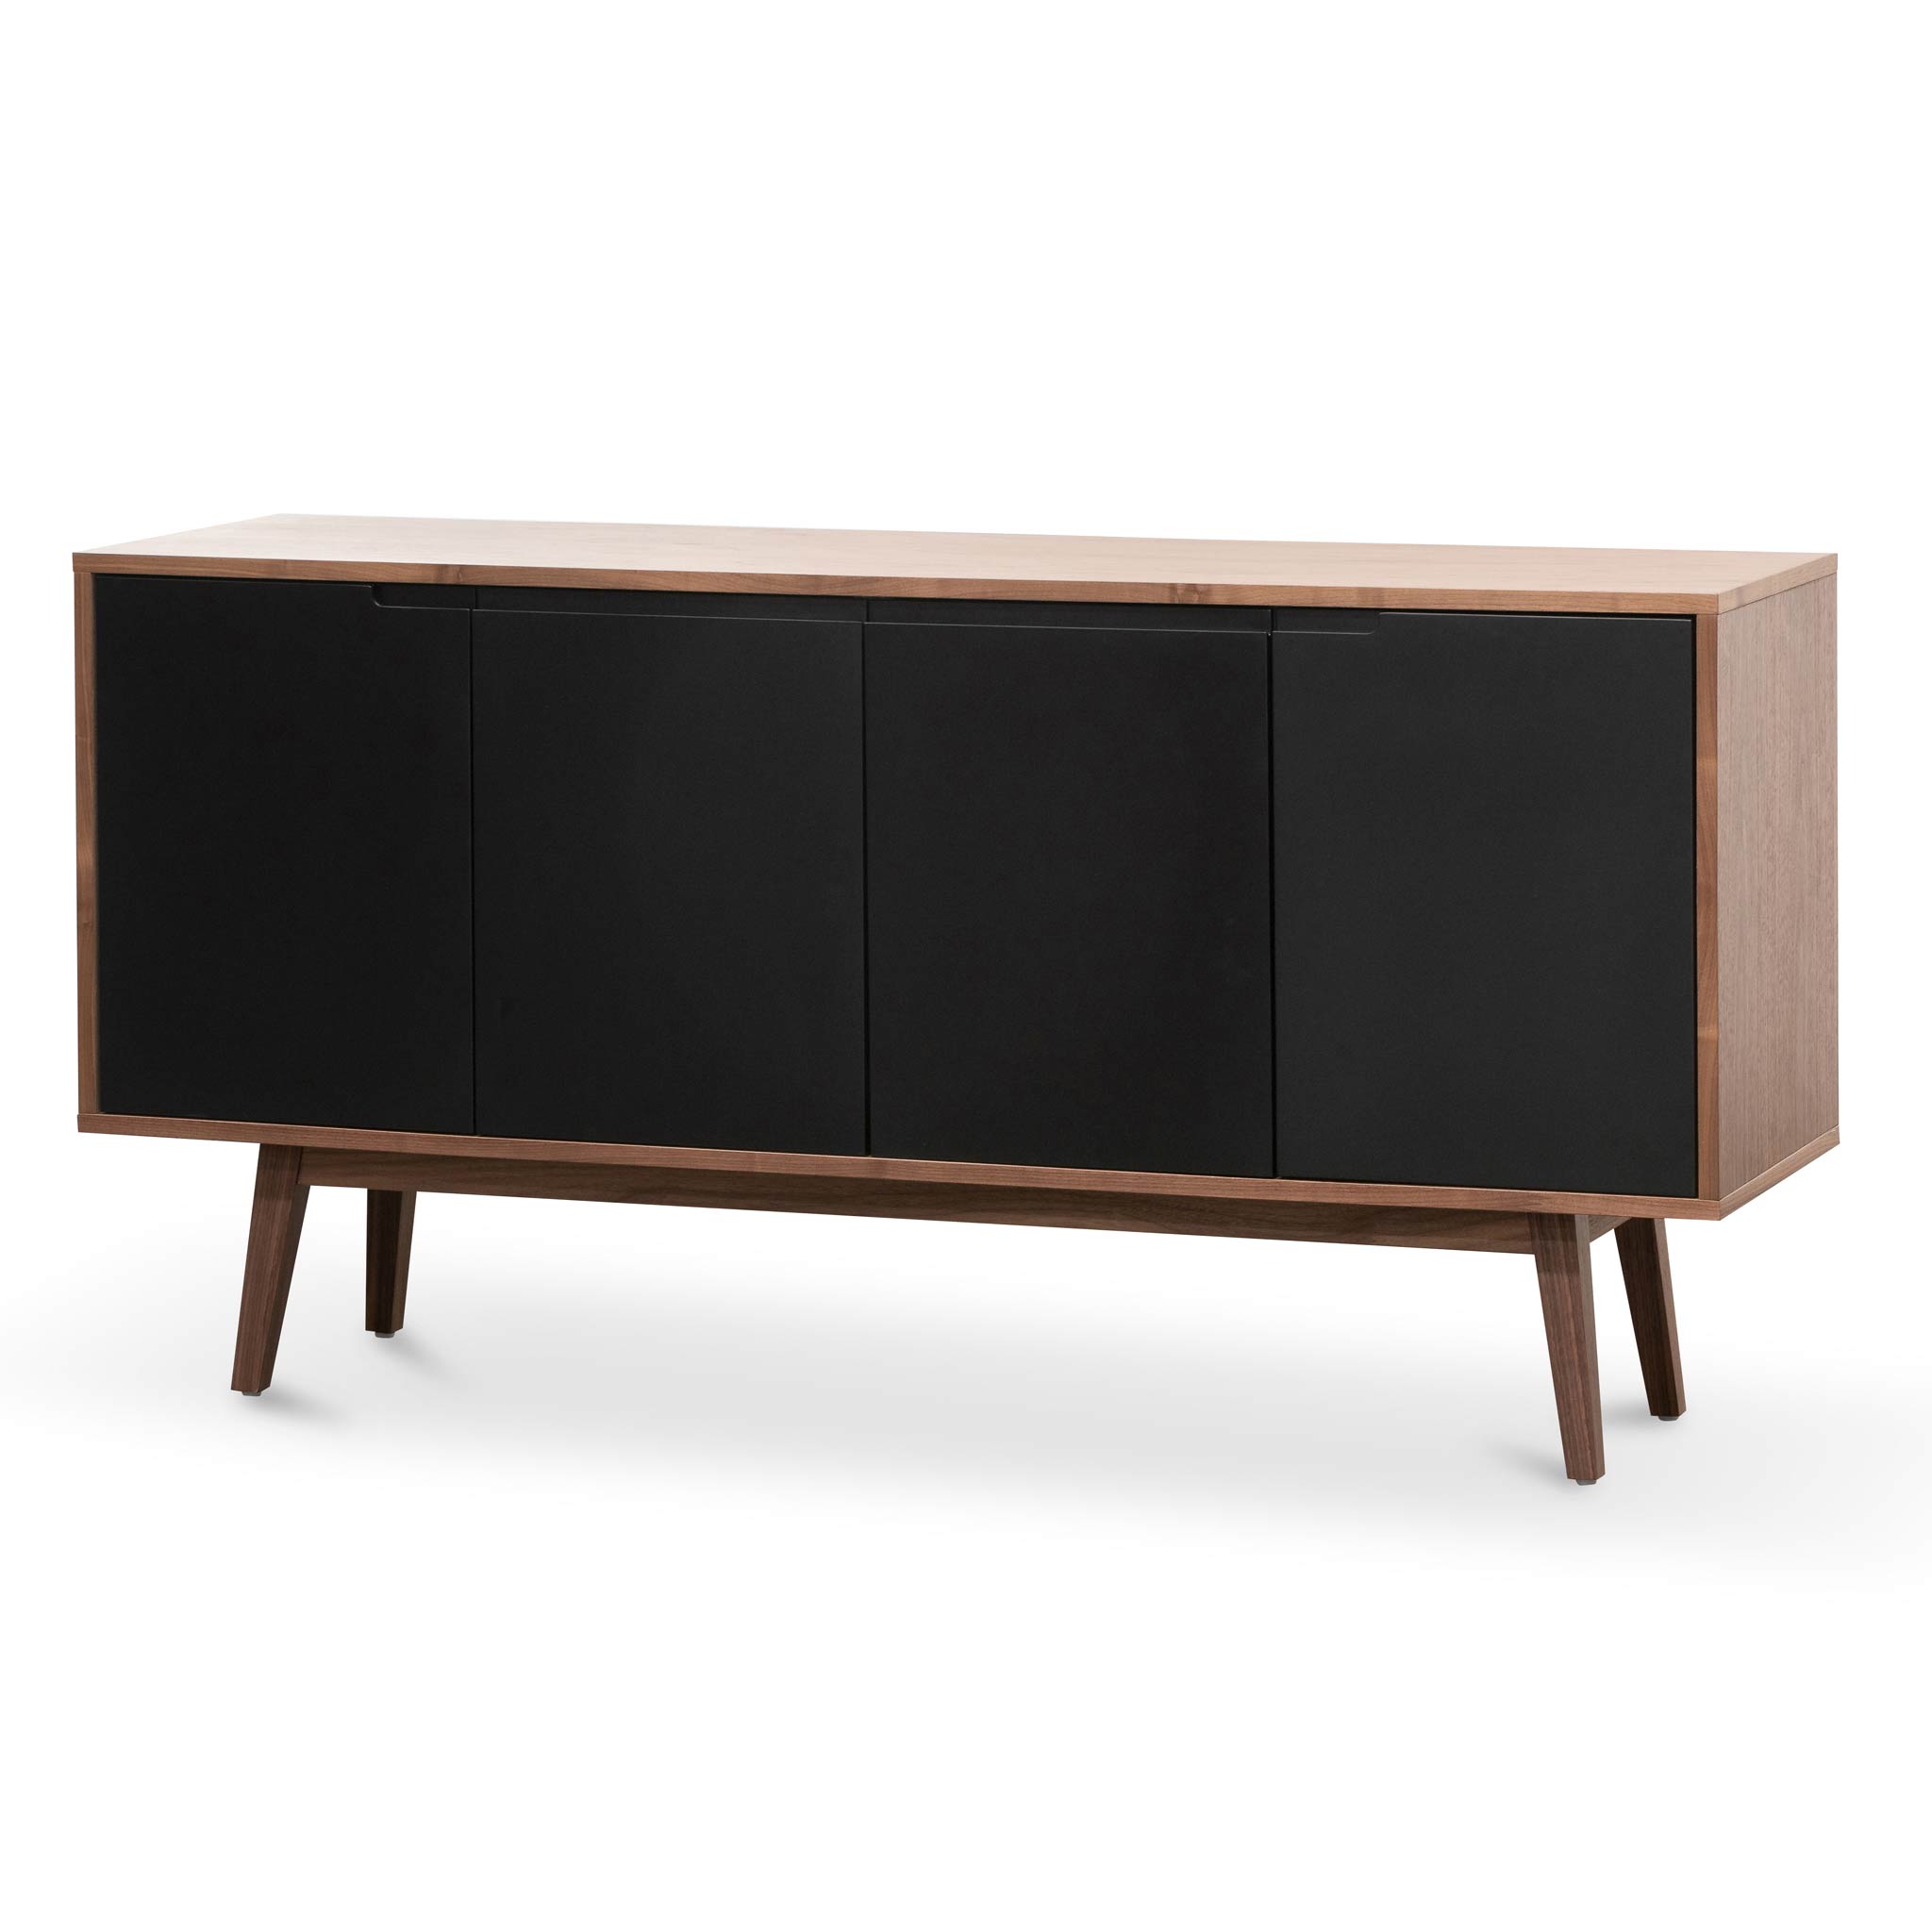 Lucy 1.6m Sideboard Buffet Unit - Walnut with Black Doors